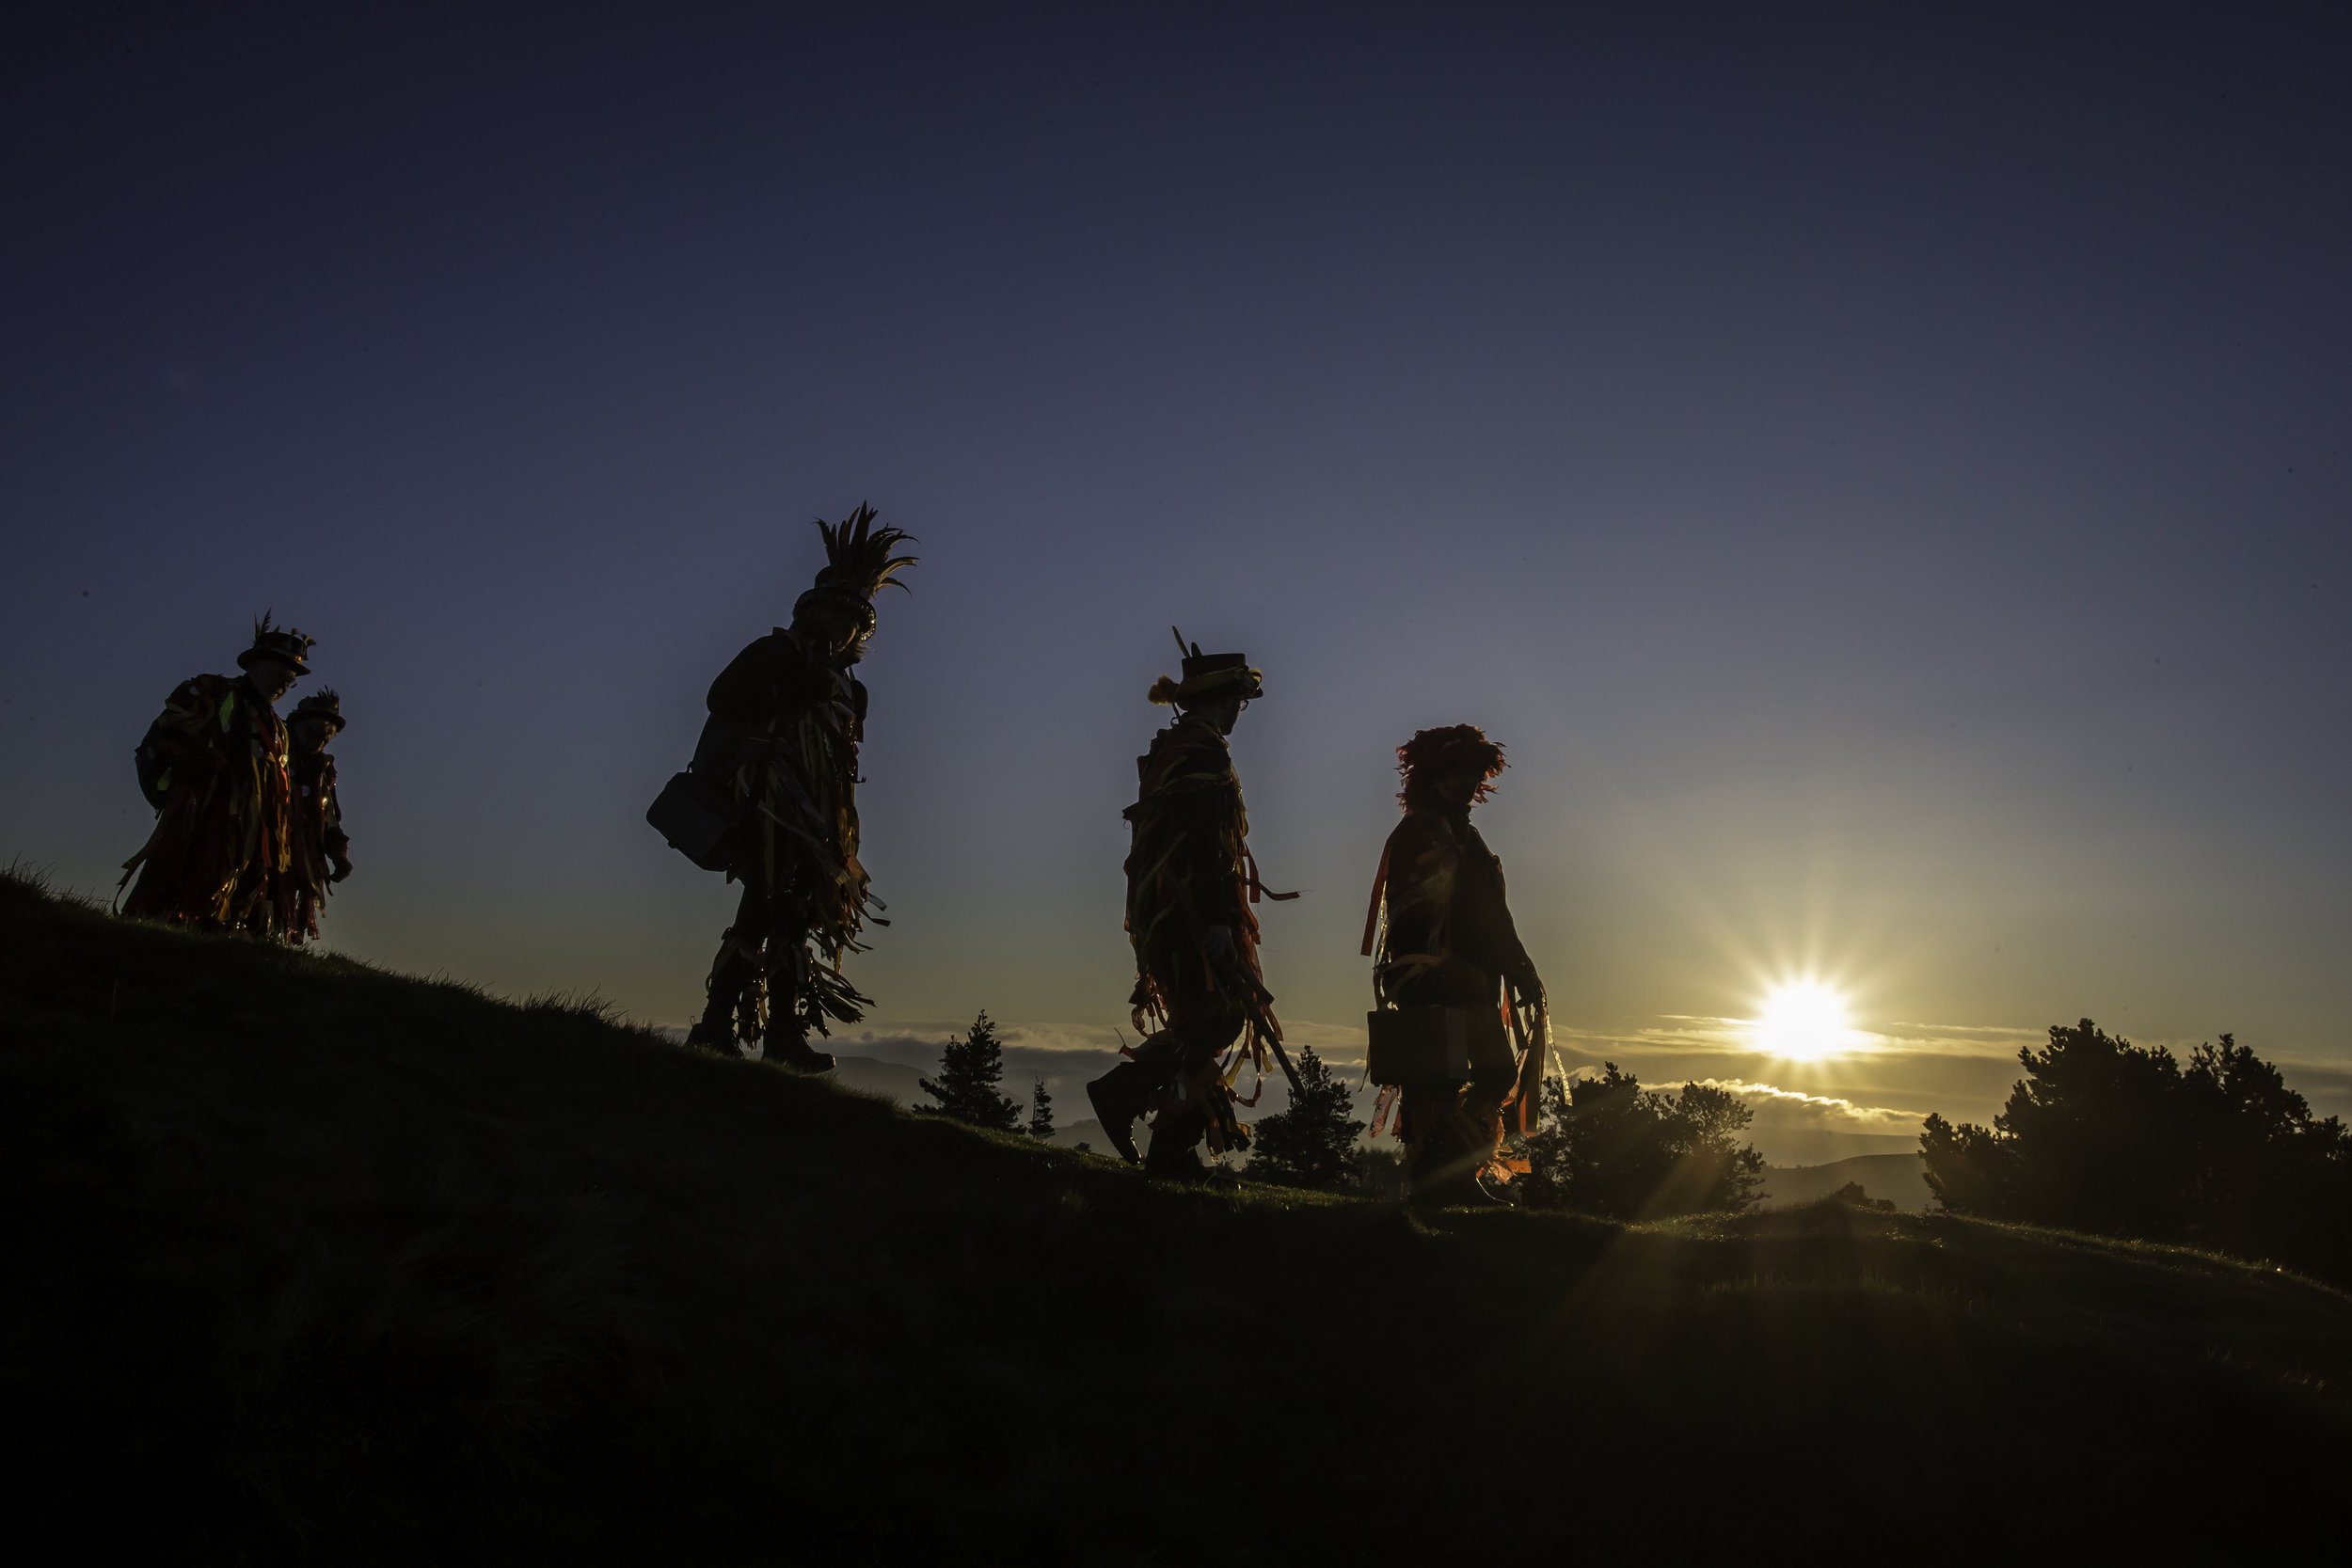  Morris Dancers celebrate May Day or 'Beltane' by dancing as the sun rises in Derbyshire, England as part of an ancient tradition, said to date back to pagan times.
Photo by Lindsey Parnaby, 01 May 2018
 